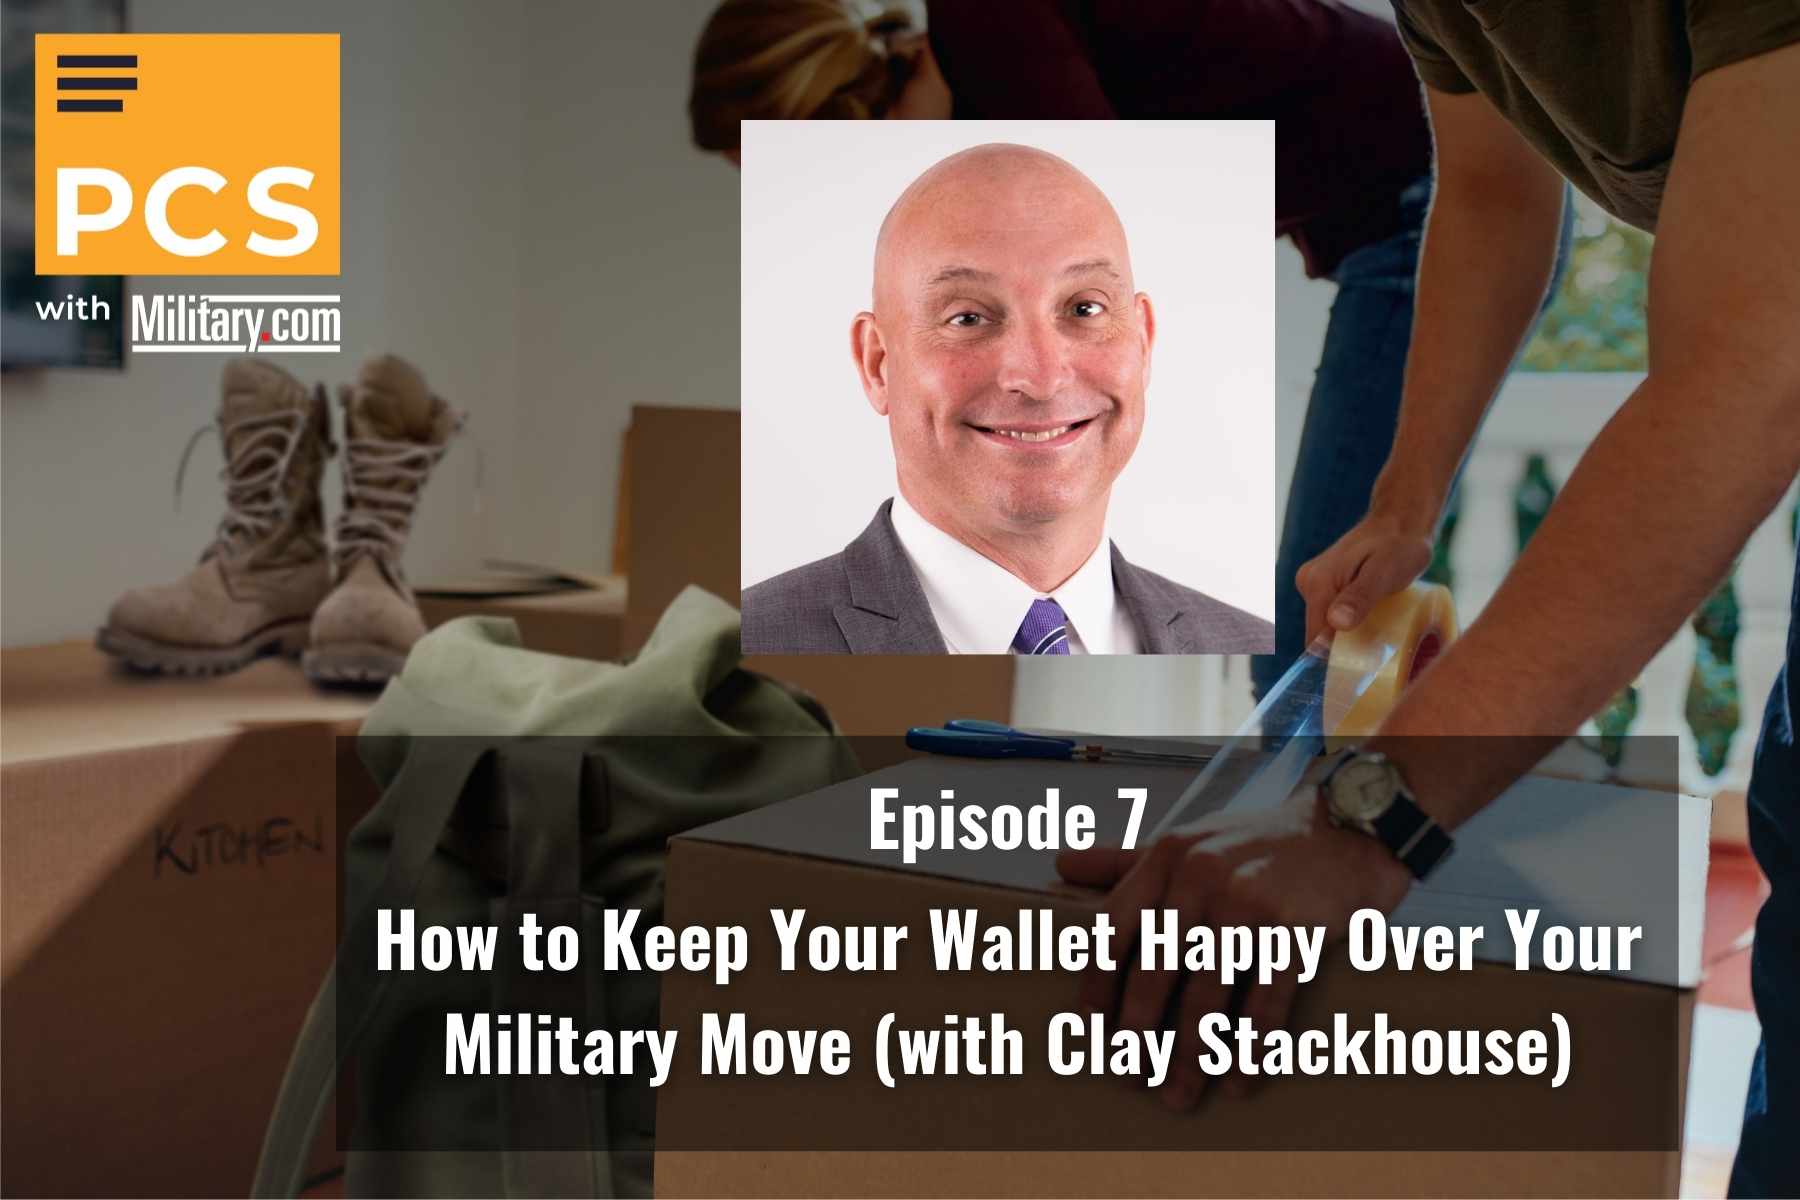 How to Keep Your Wallet Happy over Your Military Move